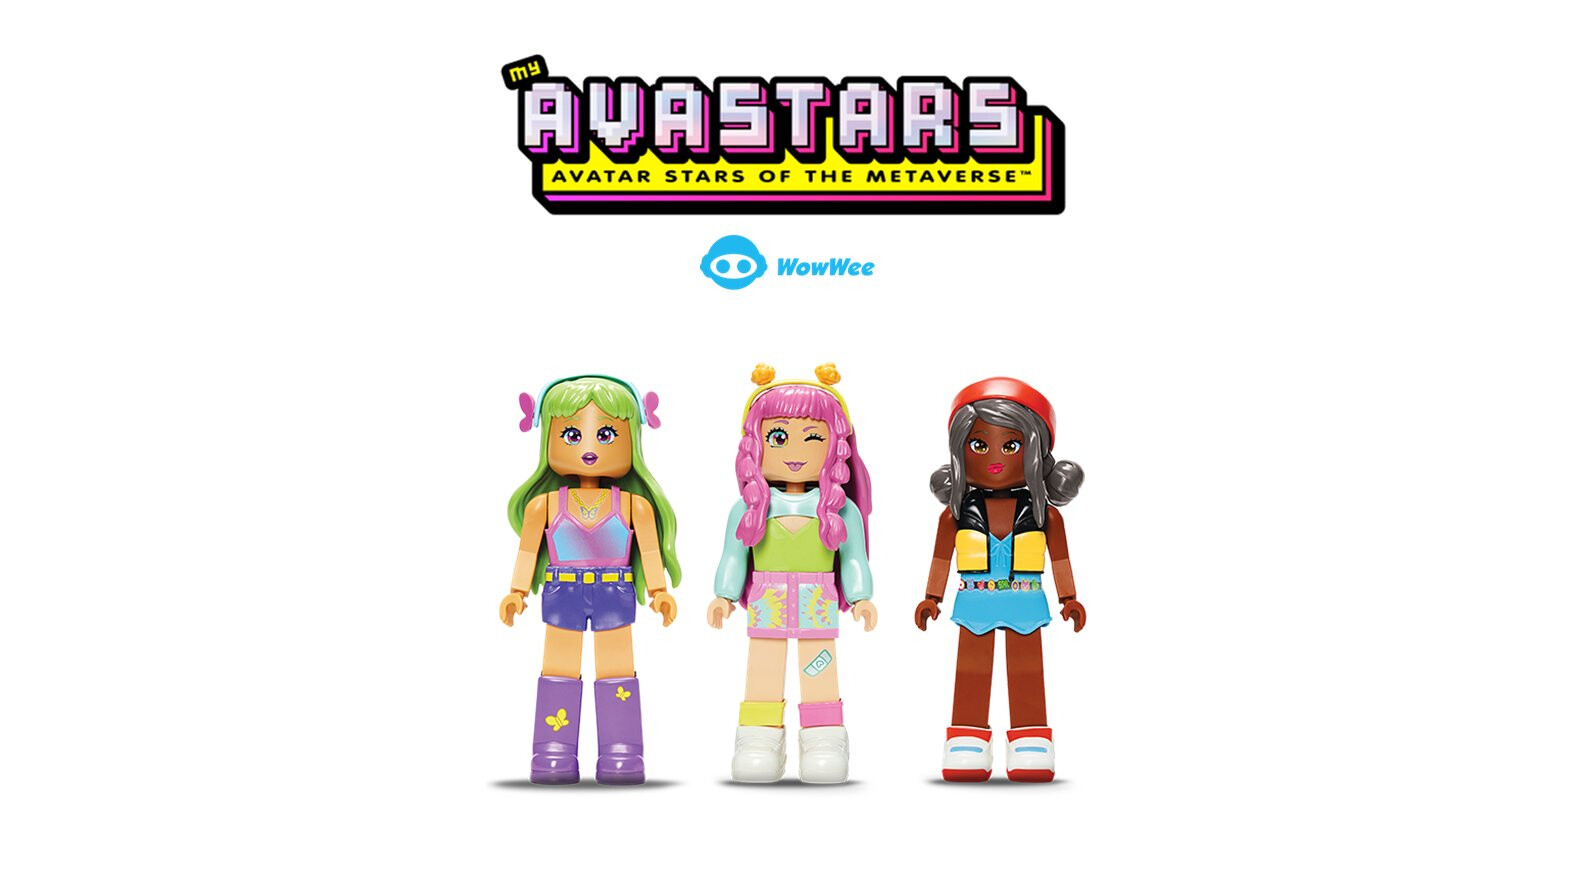 Thank you Wowwee for sending me these! For blocky, Lego-type dolls the, Avatar Toys